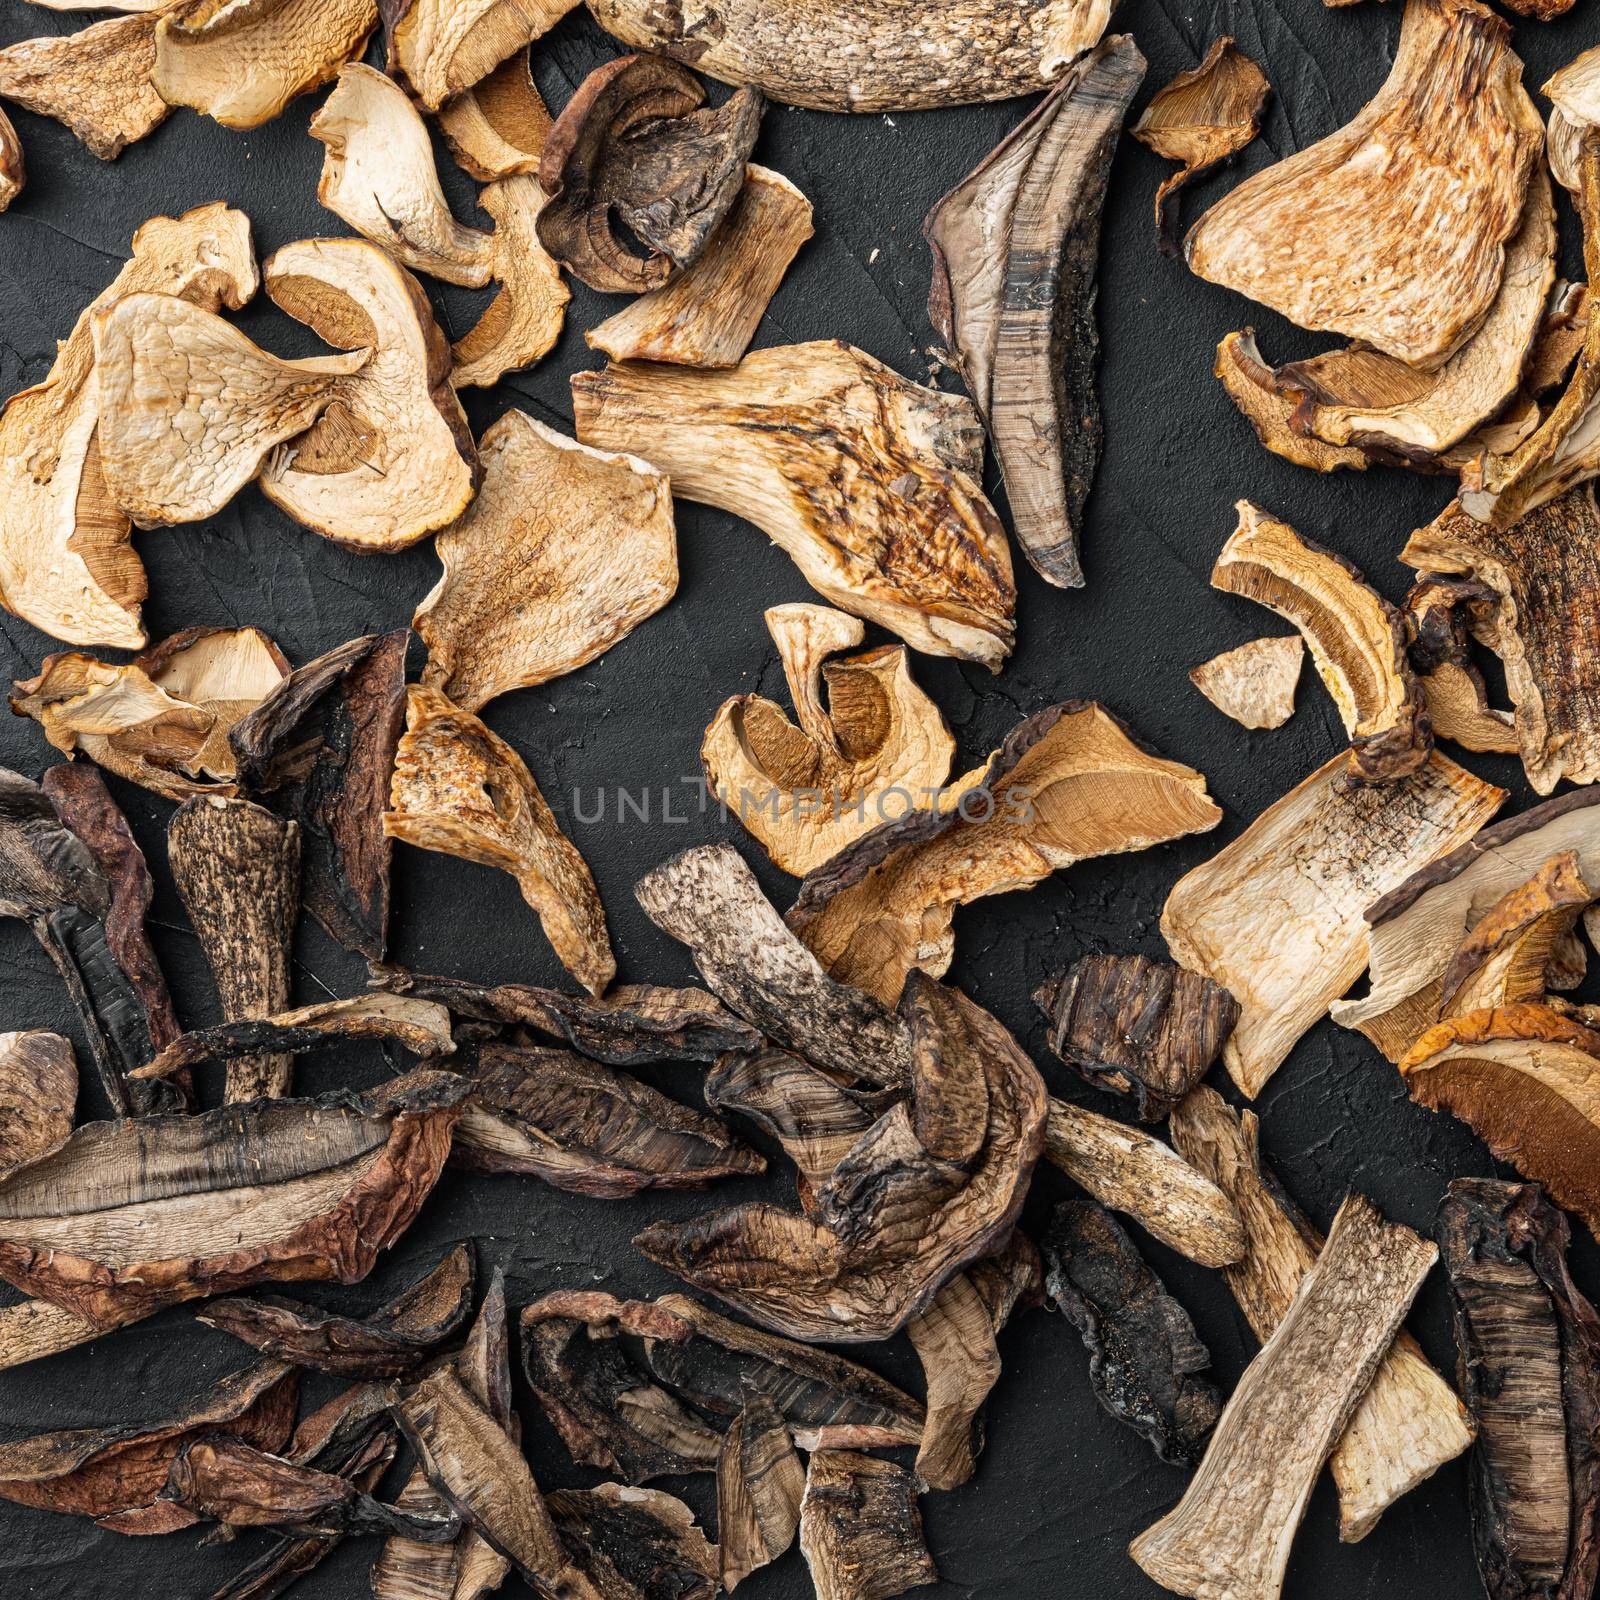 Set of dried mushrooms, on black background, top view flat lay by Ilianesolenyi